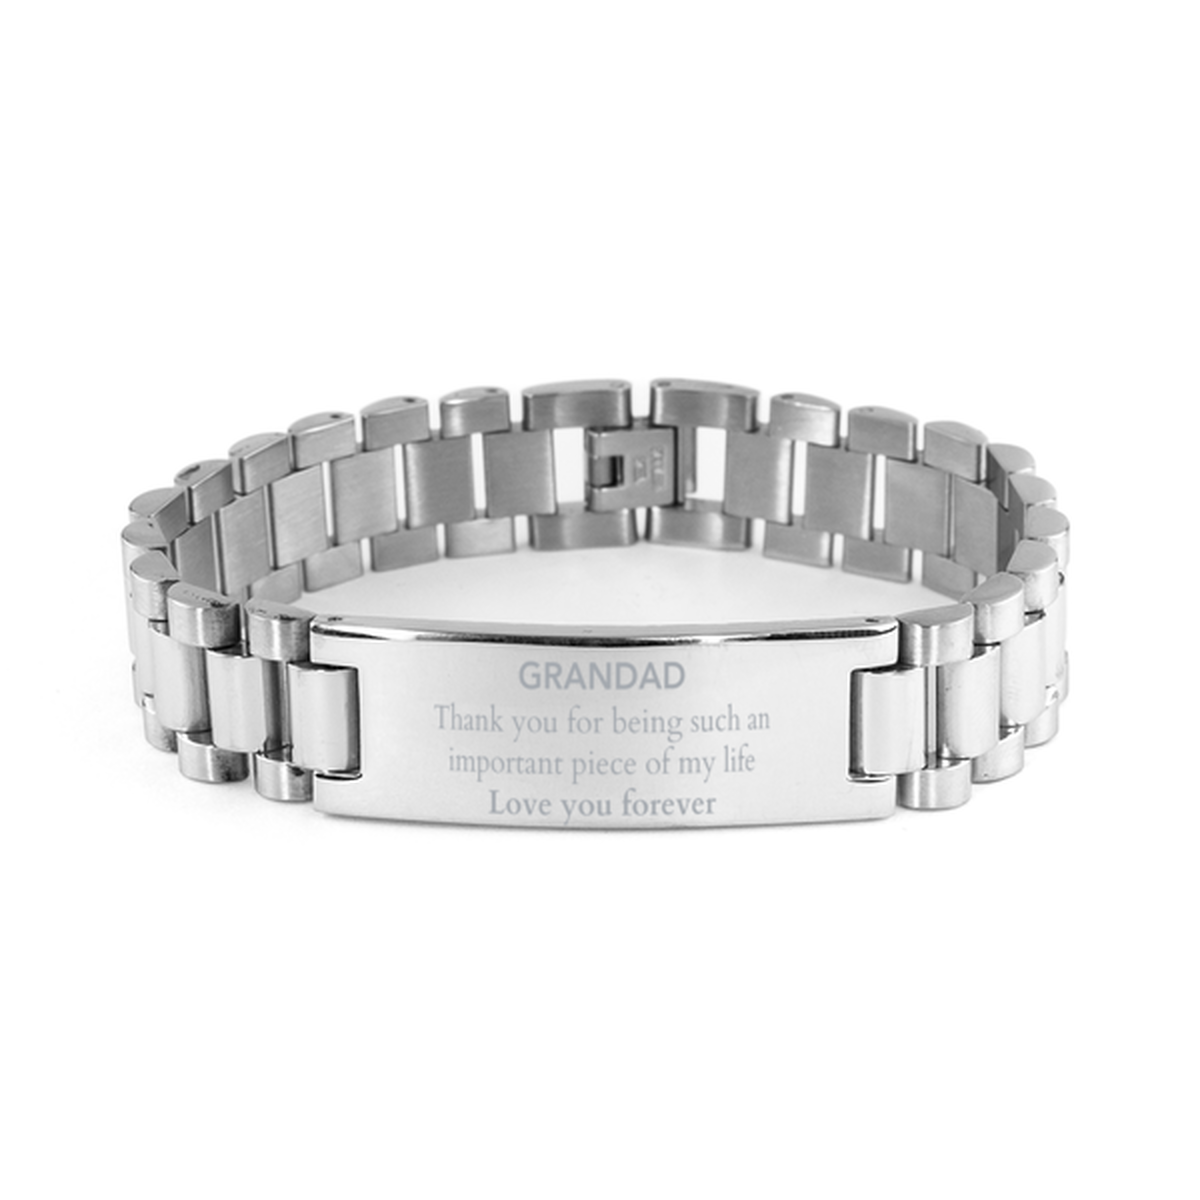 Appropriate Grandad Ladder Stainless Steel Bracelet Epic Birthday Gifts for Grandad Thank you for being such an important piece of my life Grandad Christmas Mothers Fathers Day